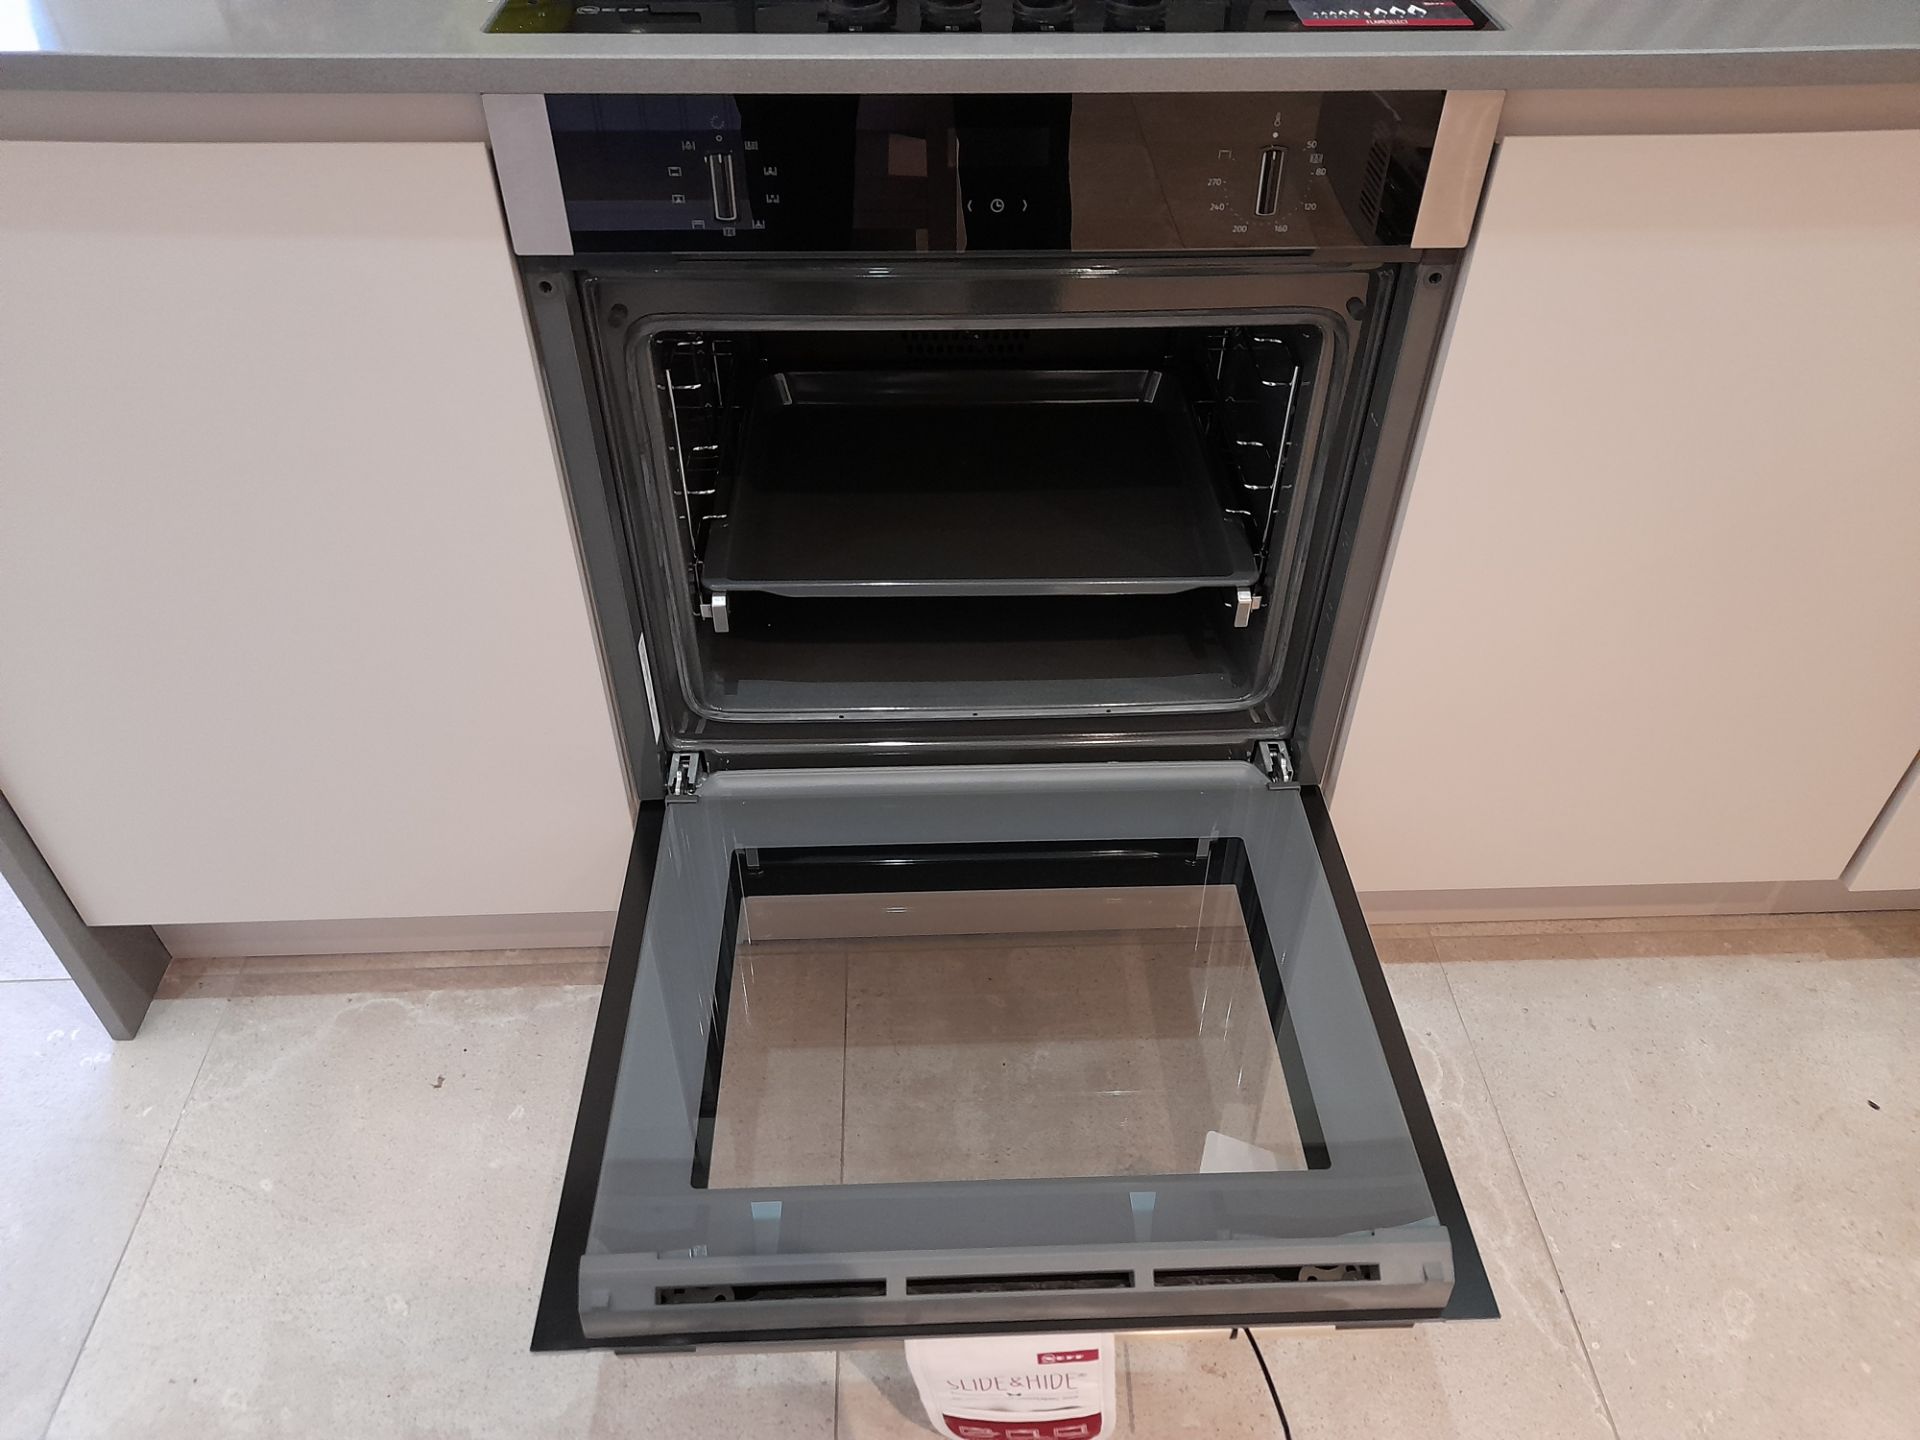 Neff B1ACE4HNOB circo therm oven (Approx 600 x 600 - Image 2 of 2